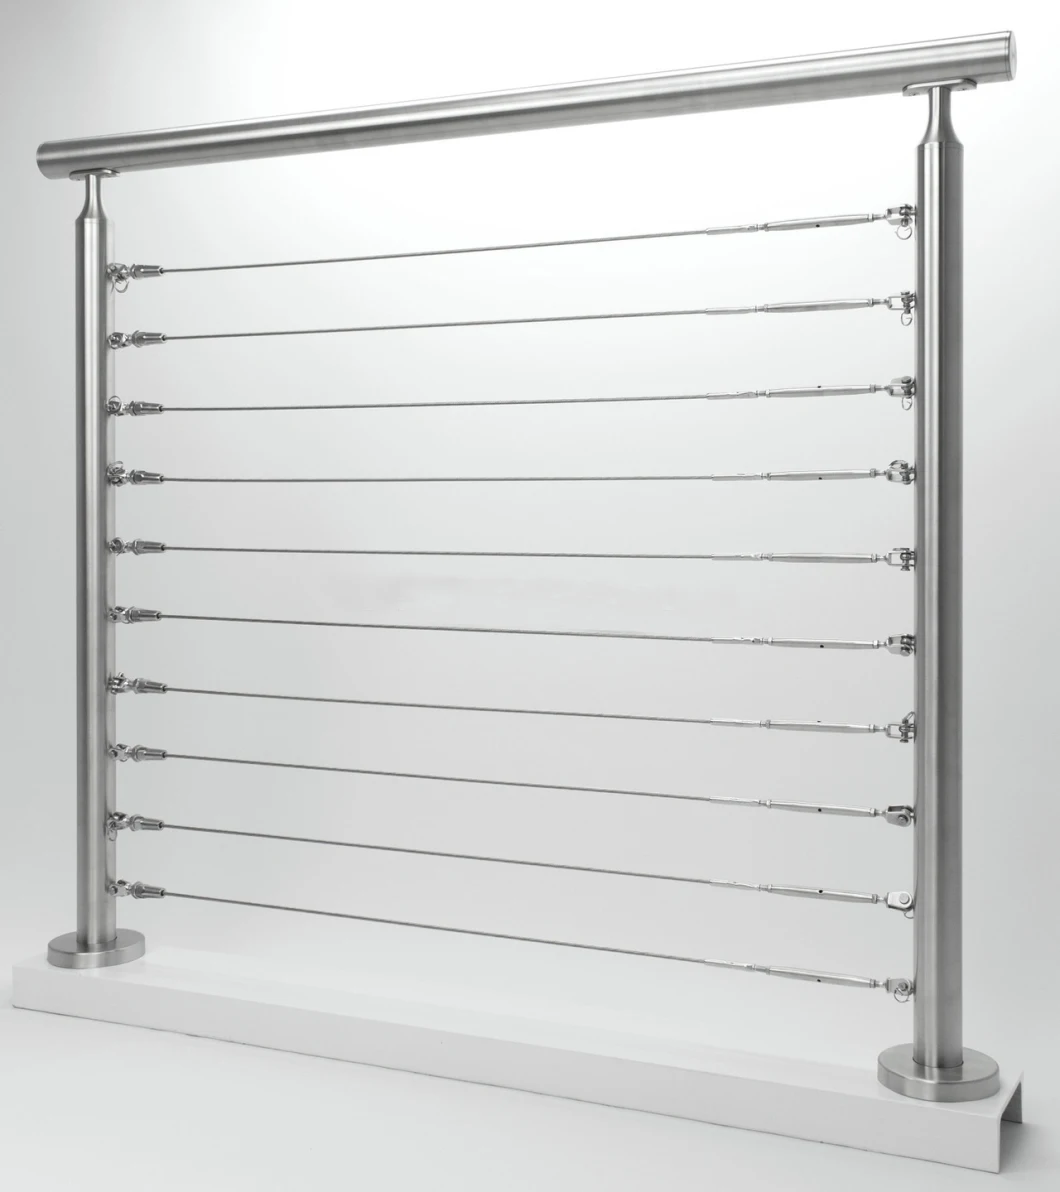 Indoor Cable Rail Fence System Residential Stainless Steel Railings for Stairs